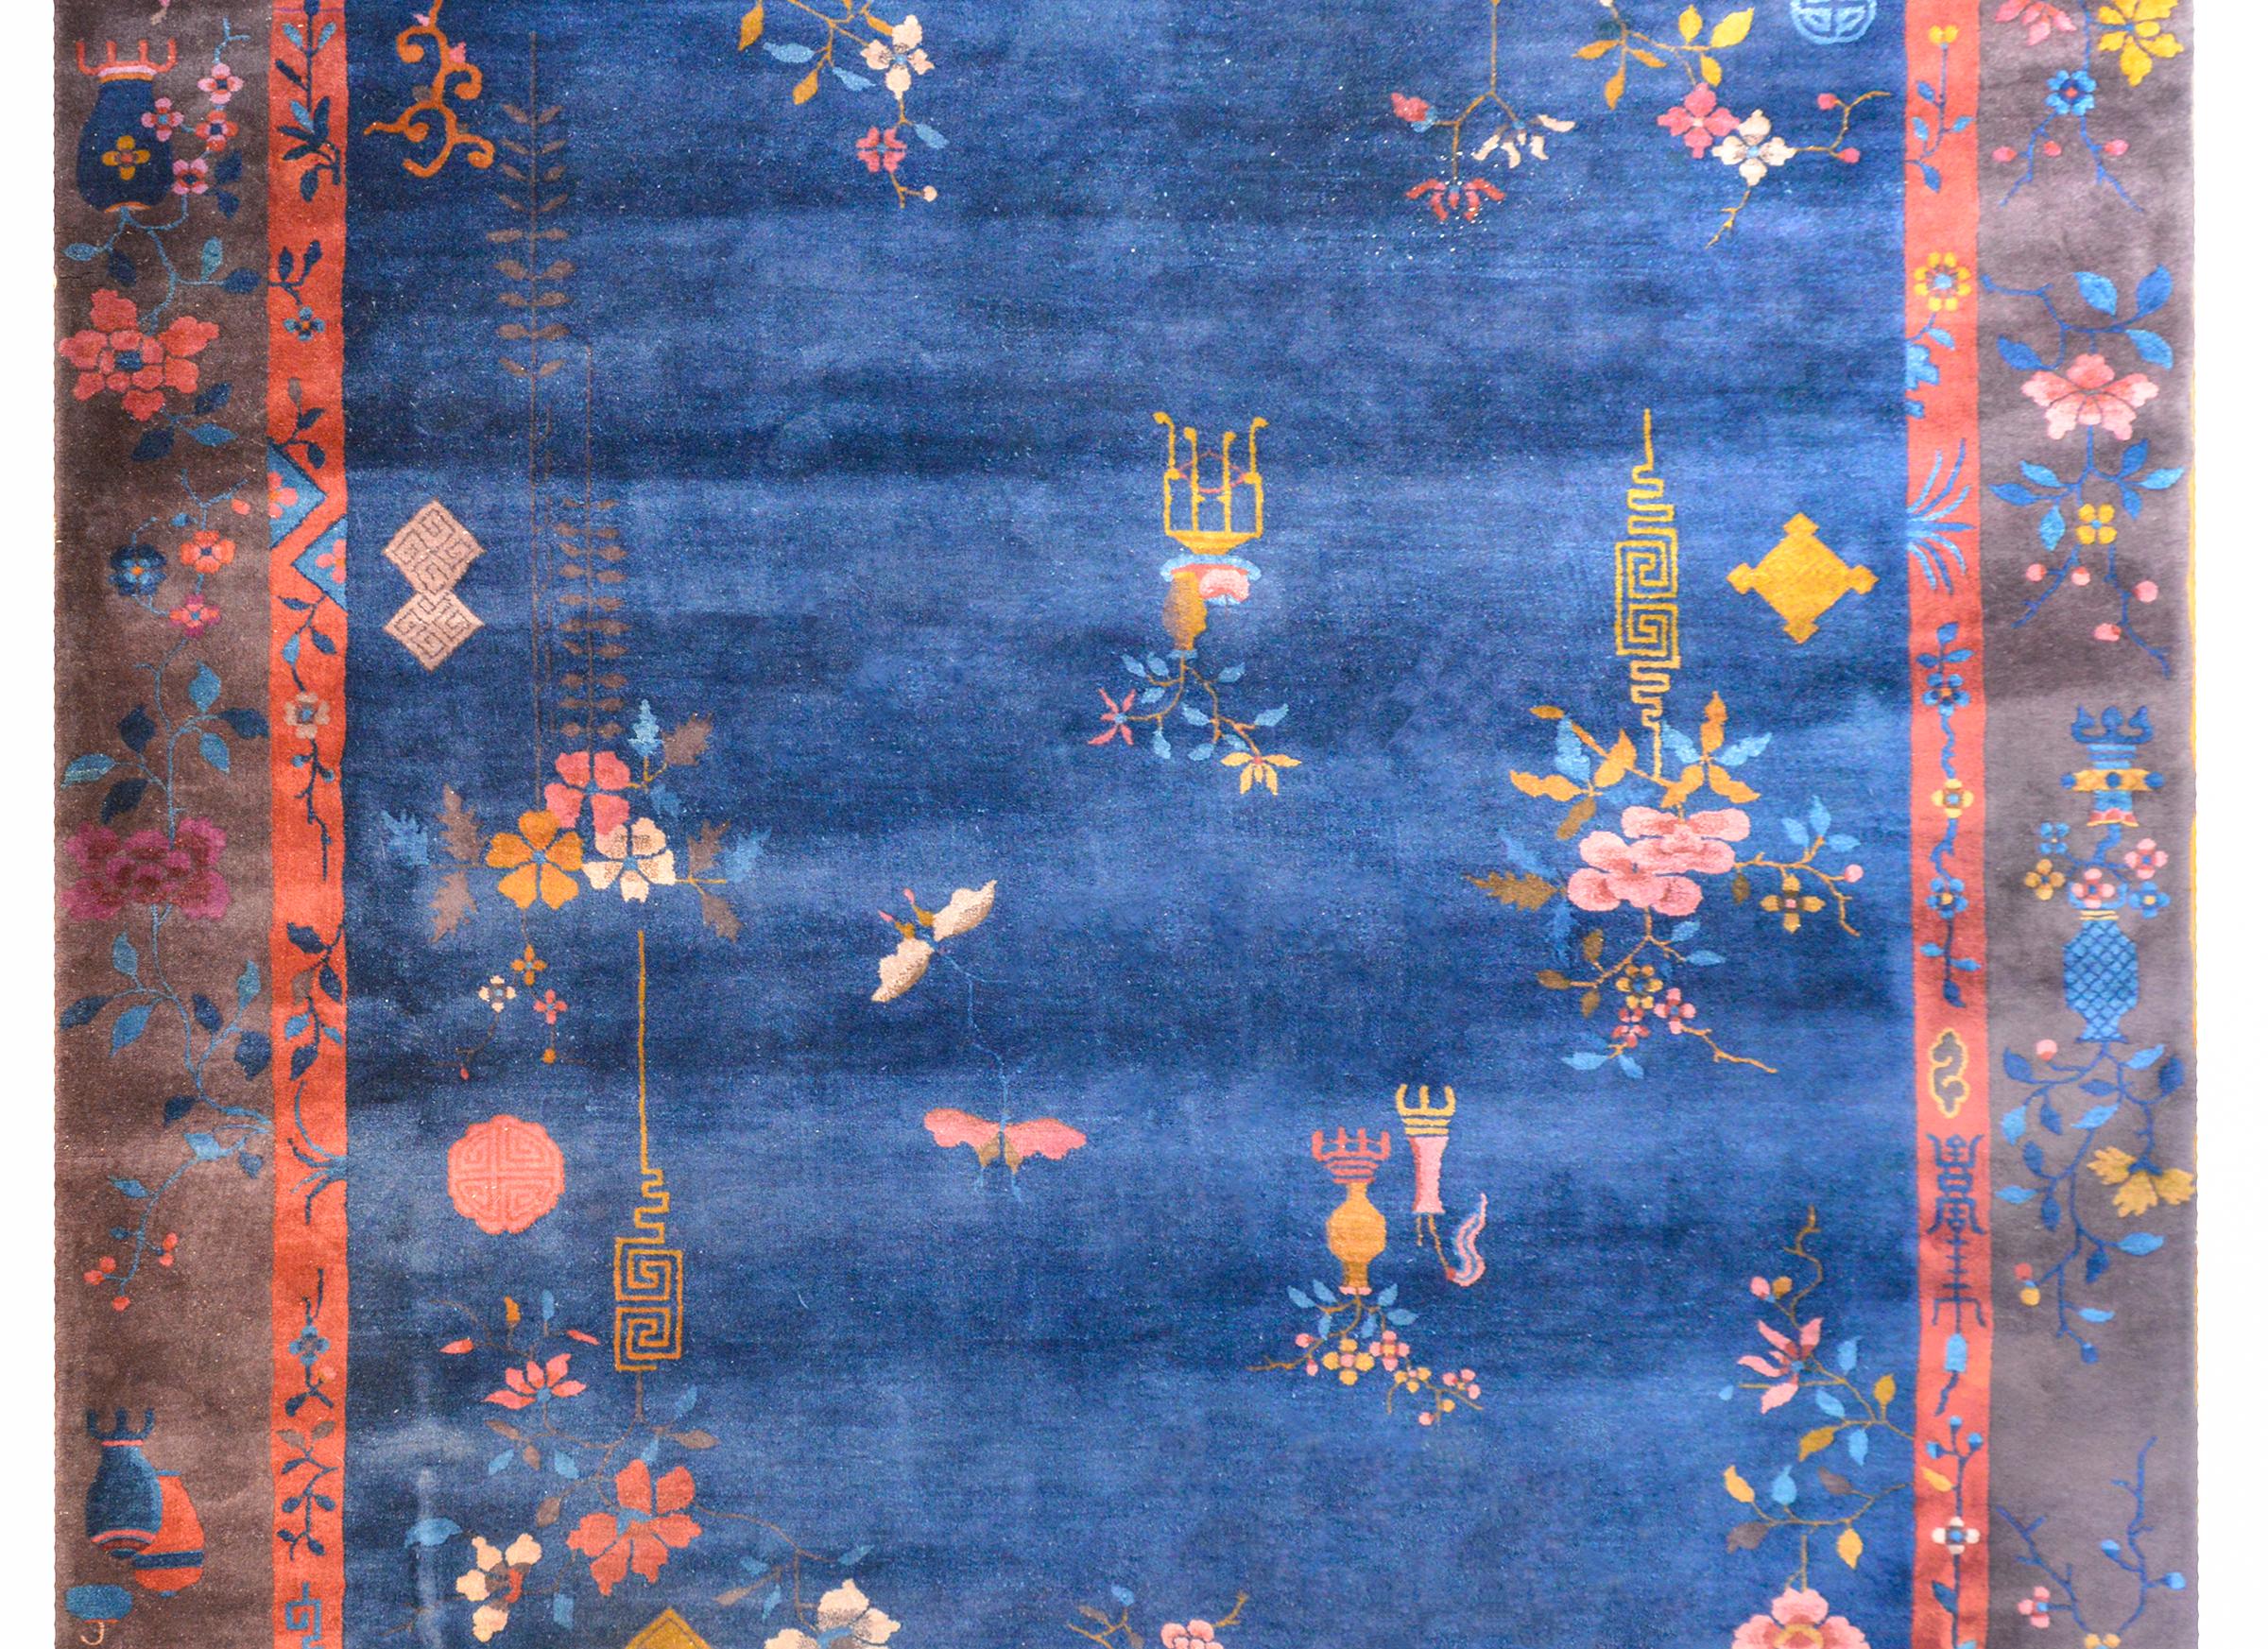 An exquisite Chinese Art Deco rug with an indigo field surrounded by a wide brown outer border with a thin orange inner border all overlaid with myriad auspicious flowering branches and planted pots with butterflies and other auspicious symbols